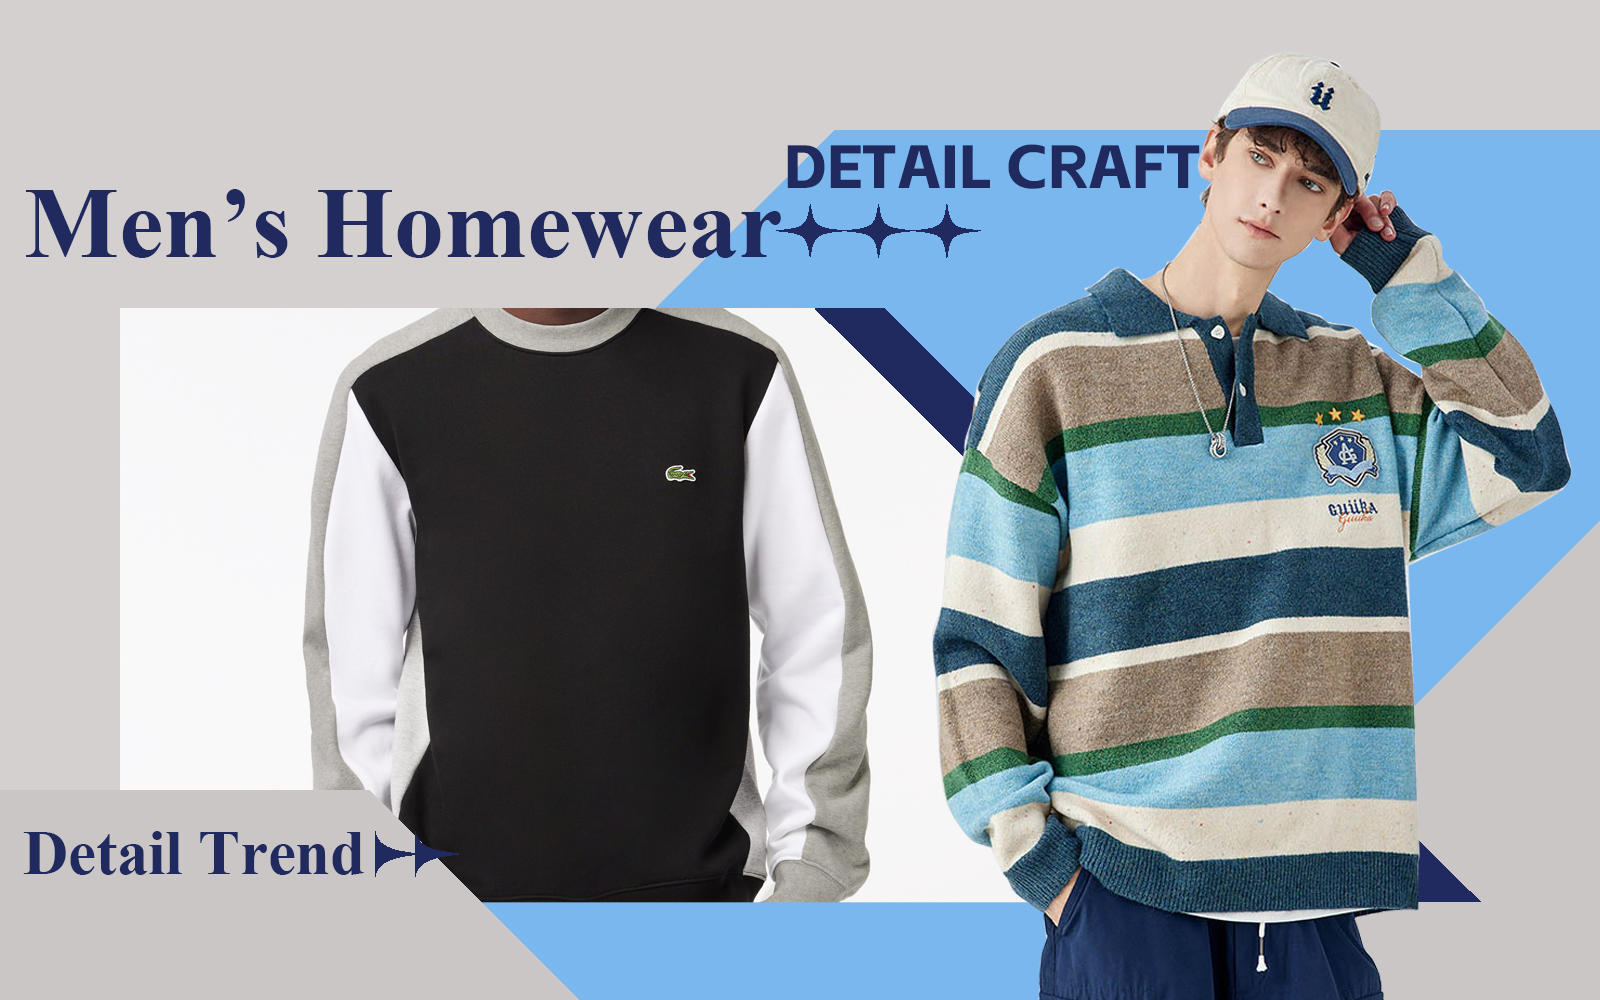 The Detail & Craft Trend for Men's Homewear